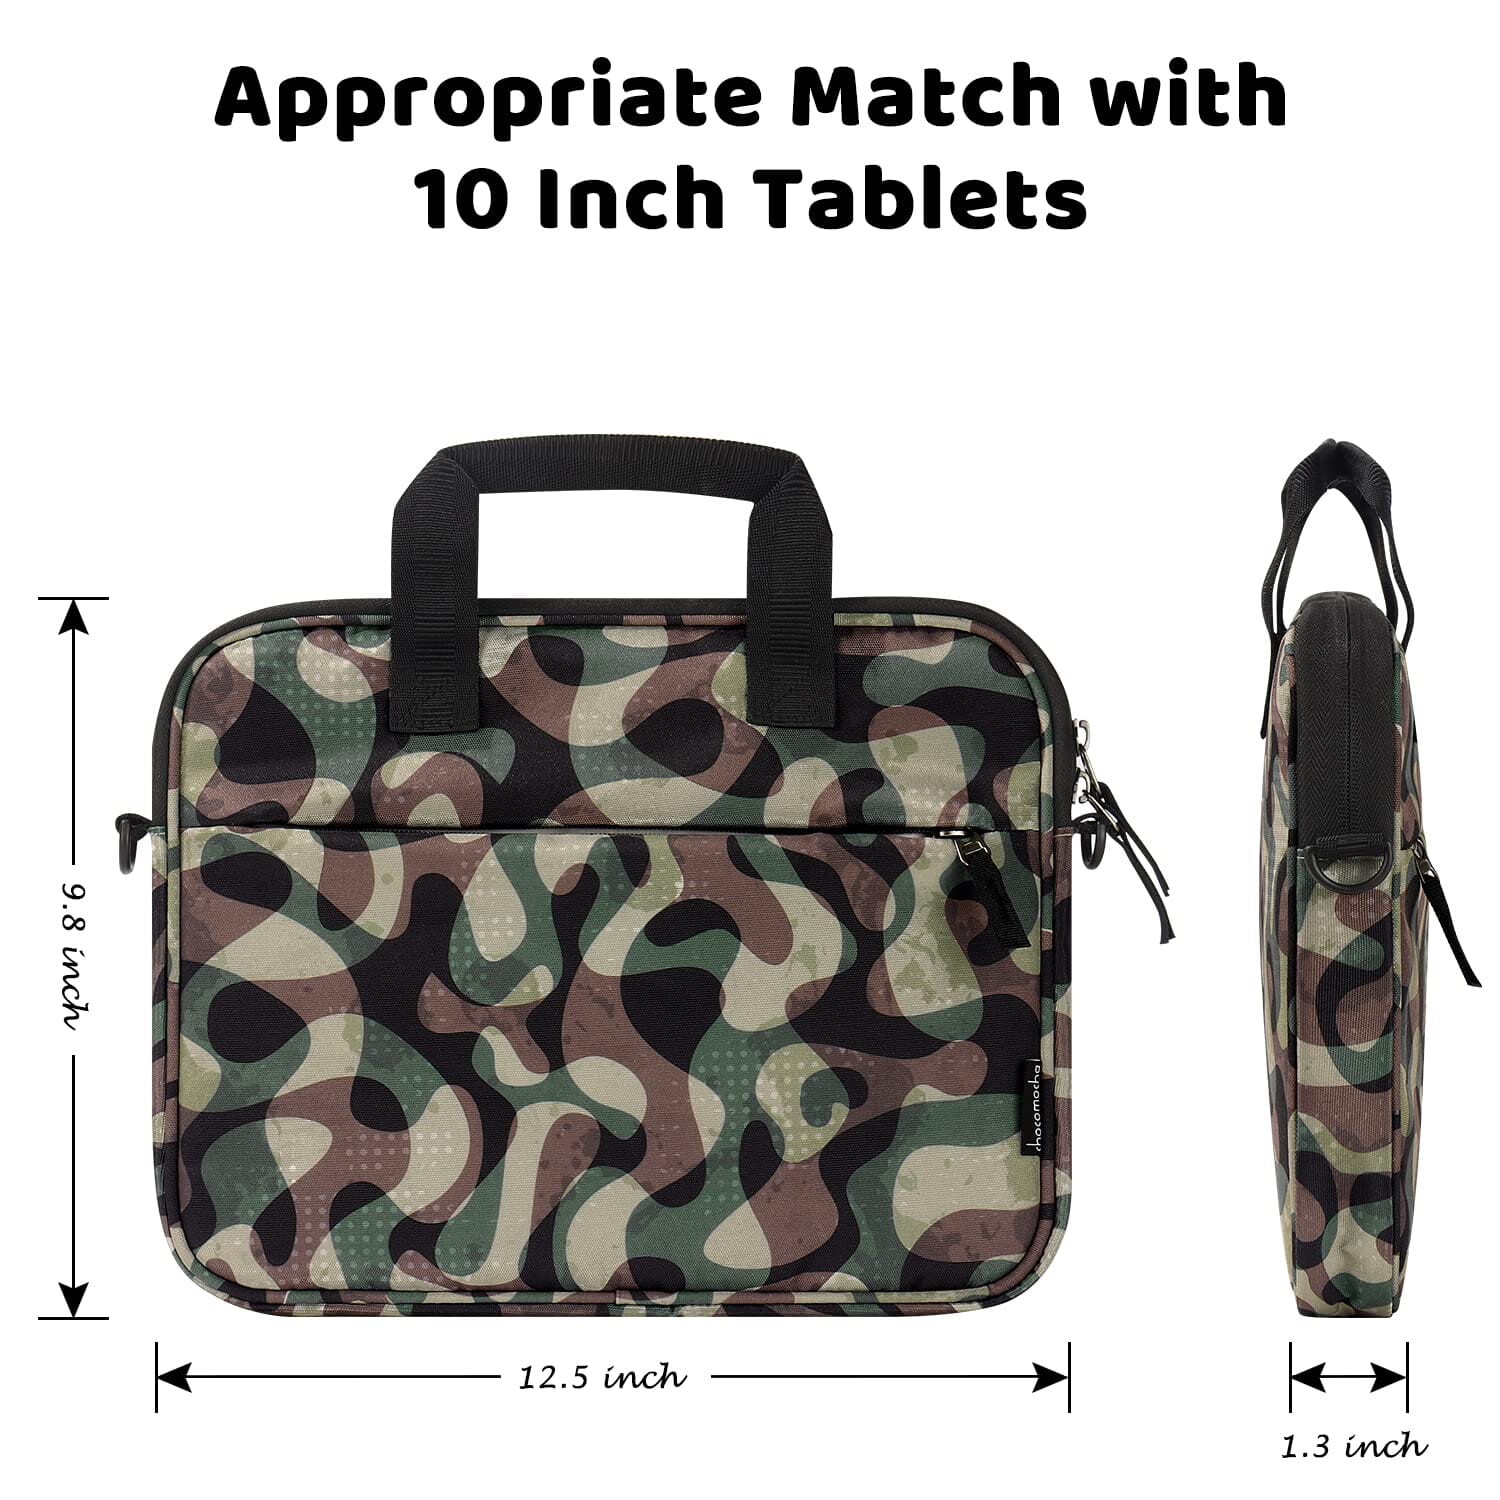 Choco Mocha 12.5 Inch Kids Tablet Sleeve Bag for Boys,Kids Tablet Carrying Case for Fire HD 10, Fire 7, Fire HD 8, Fire 10 Tablet, Kindle Kids Edition,Apple iPad, for Kids, Camo chocomochakids 